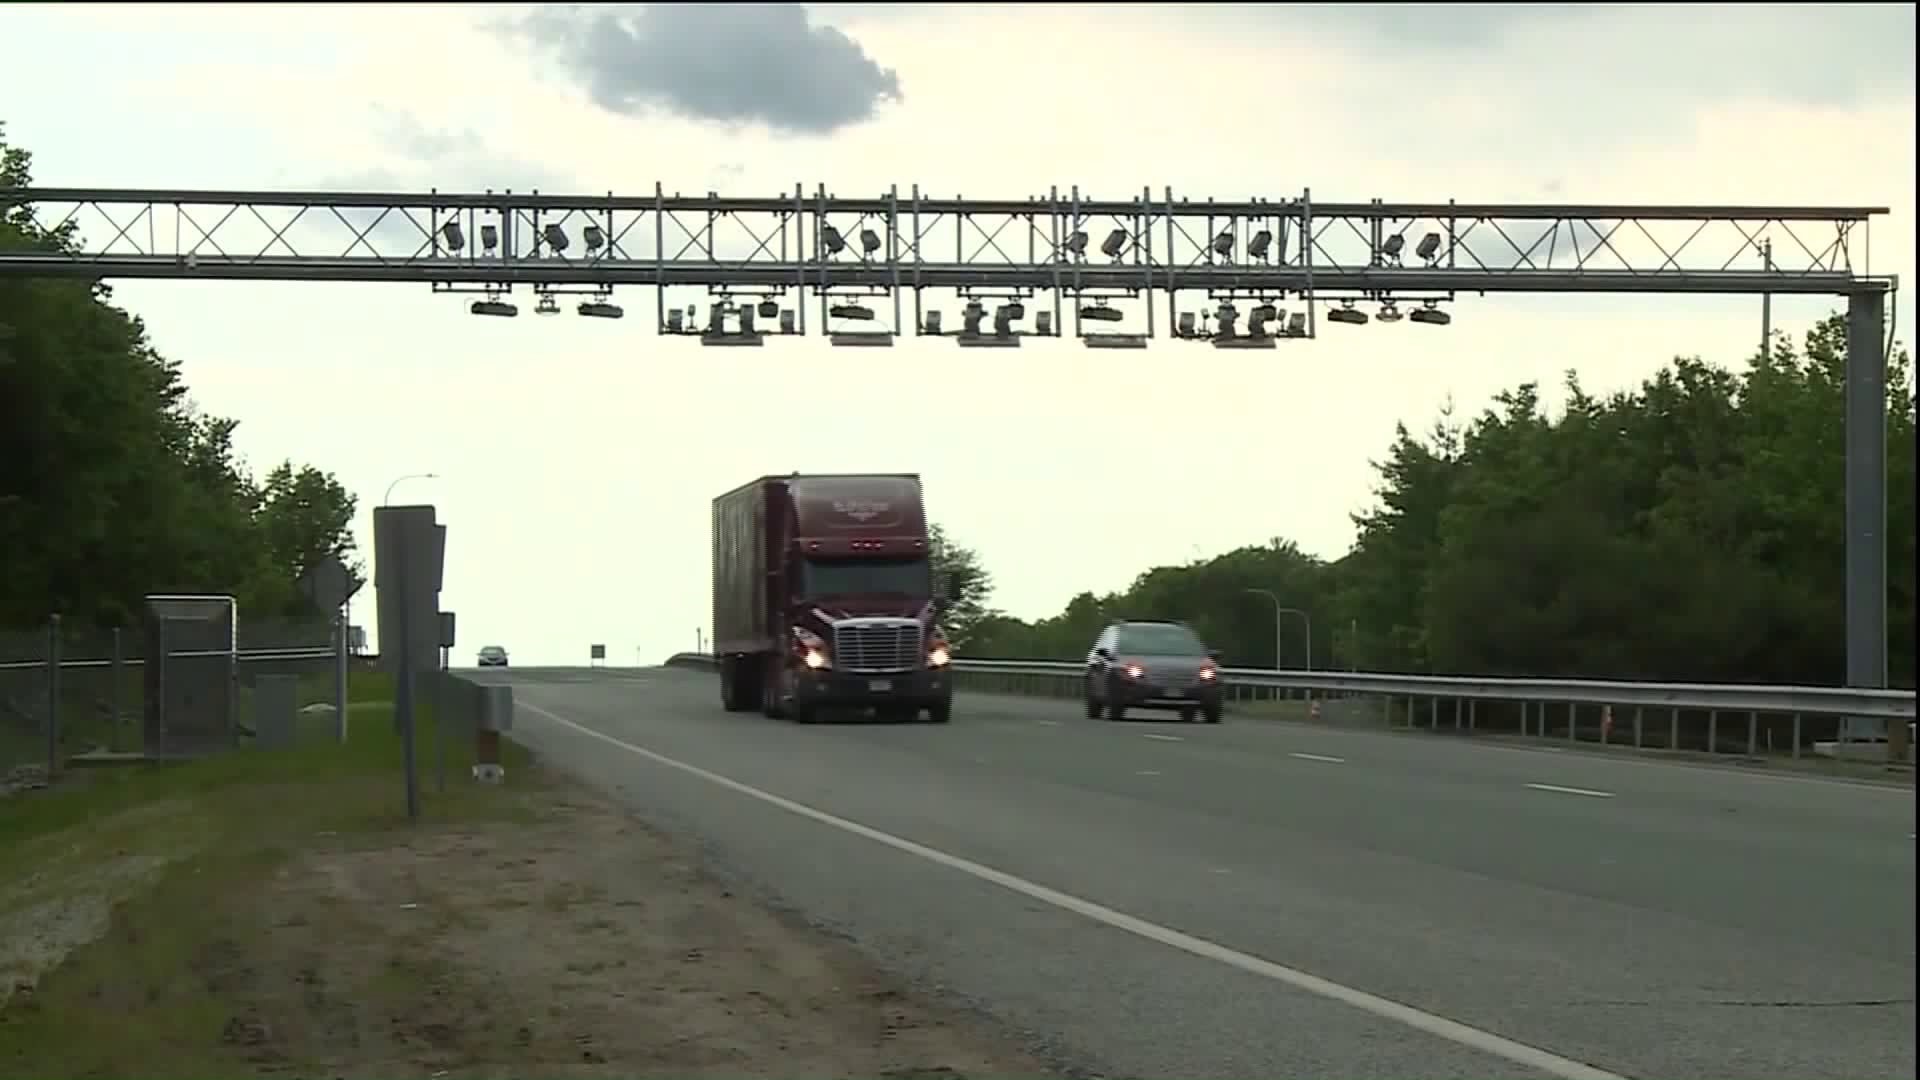 Governor Lamont changes stance, says he will consider tolling cars